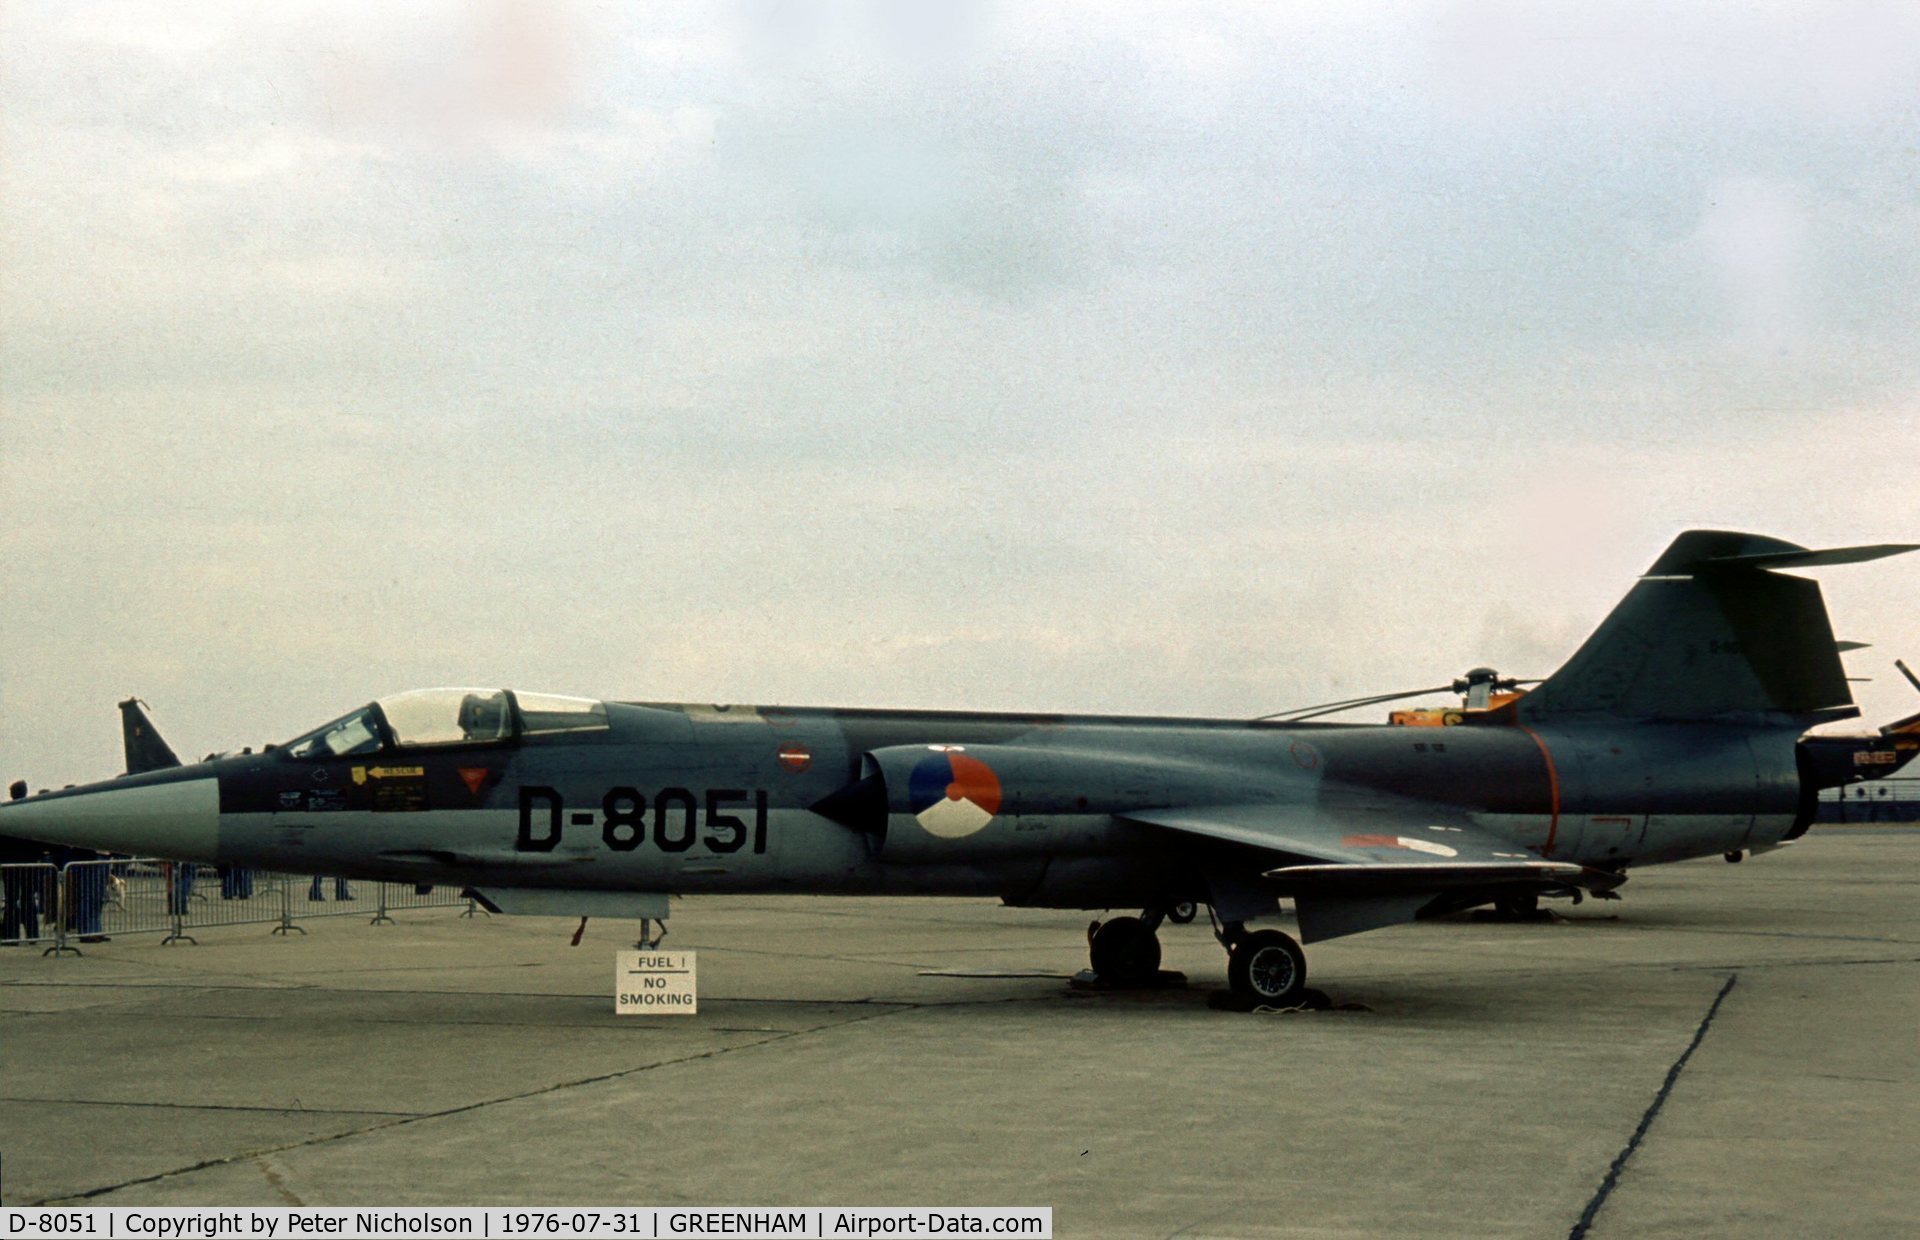 D-8051, Lockheed F-104G Starfighter C/N 683-8051, Starfighter of 312 Squadron Royal Netherlands Air Force at the 1976 Intnl Air Tattoo at RAF Greenham Common.